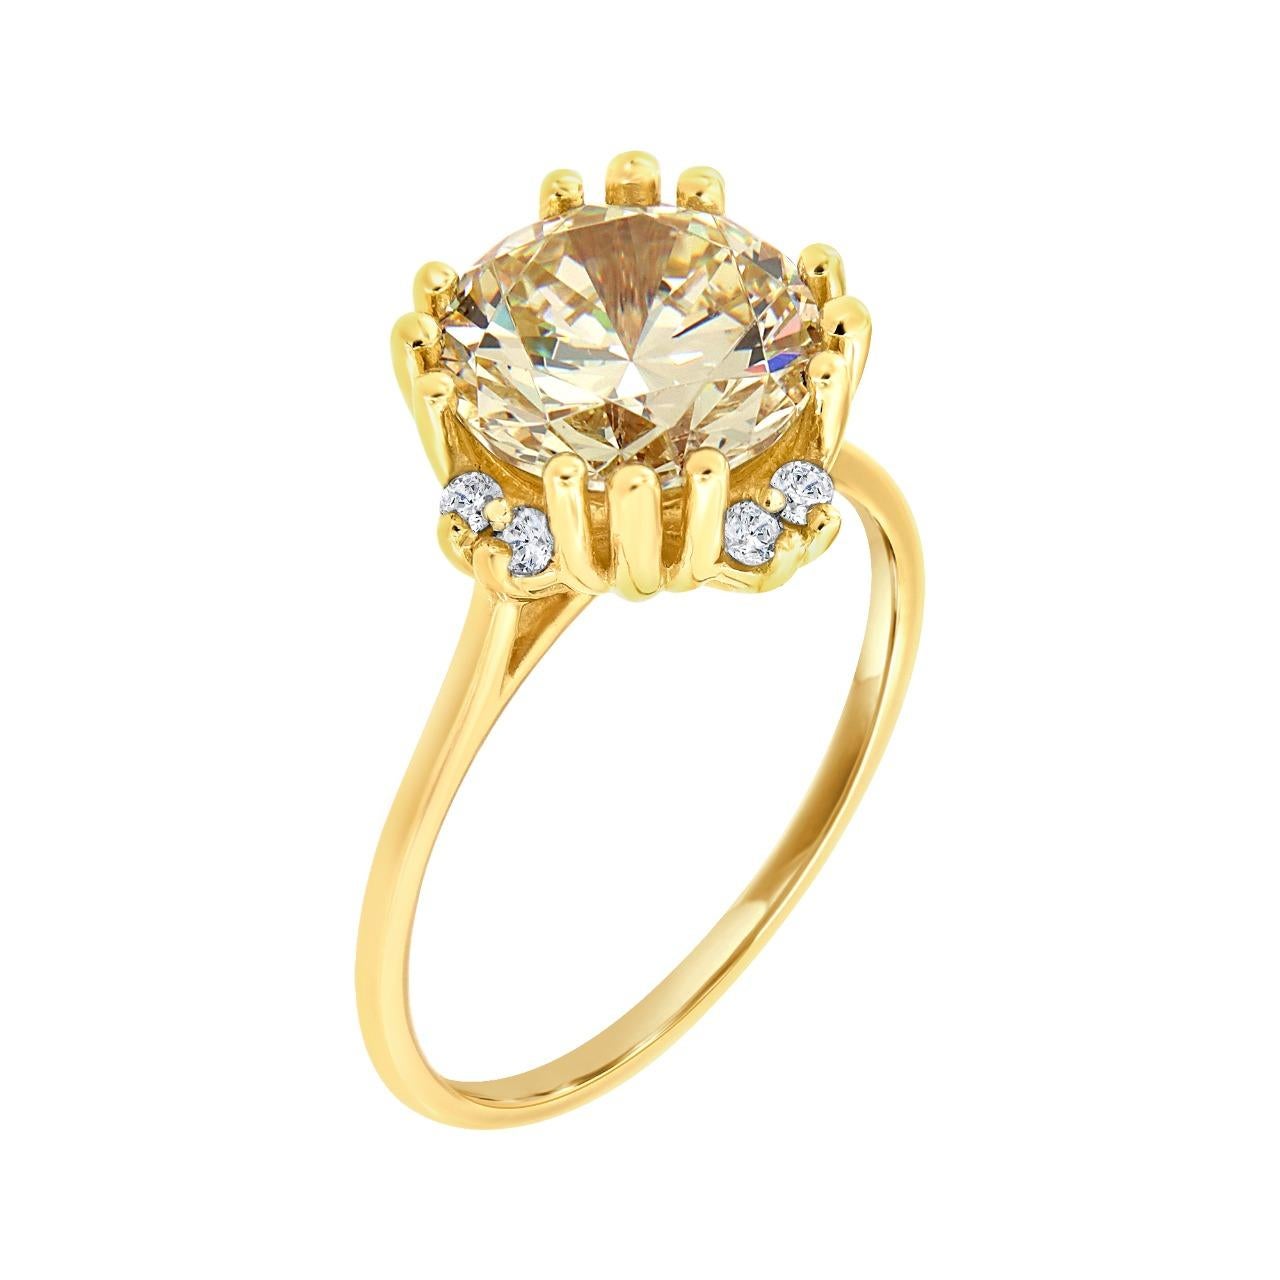 This Delicate ring features a Rare Fancy Light Yellow 4.84 -Carat (9 mm) Round Moissanite set in twelve (12) tiny prongs on top of a 1.2 mm band. Eight(8) Natural brilliant round diamonds in weight of 0.12 carat evenly scattered underneath the crown